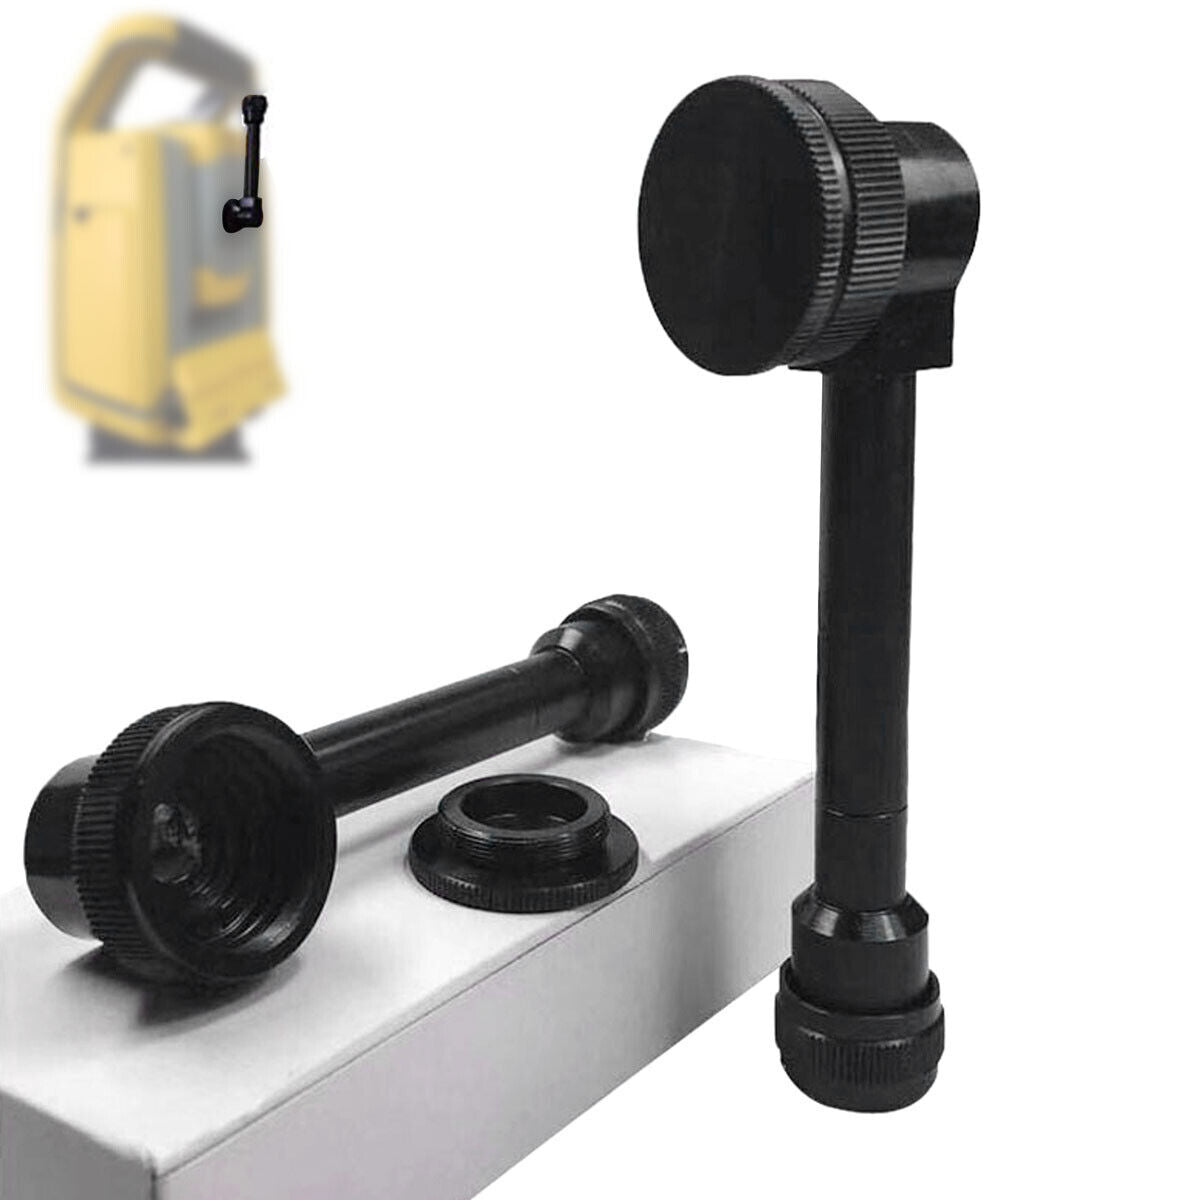 Diagonal Eyepiece For Trimble Total Stations S Series